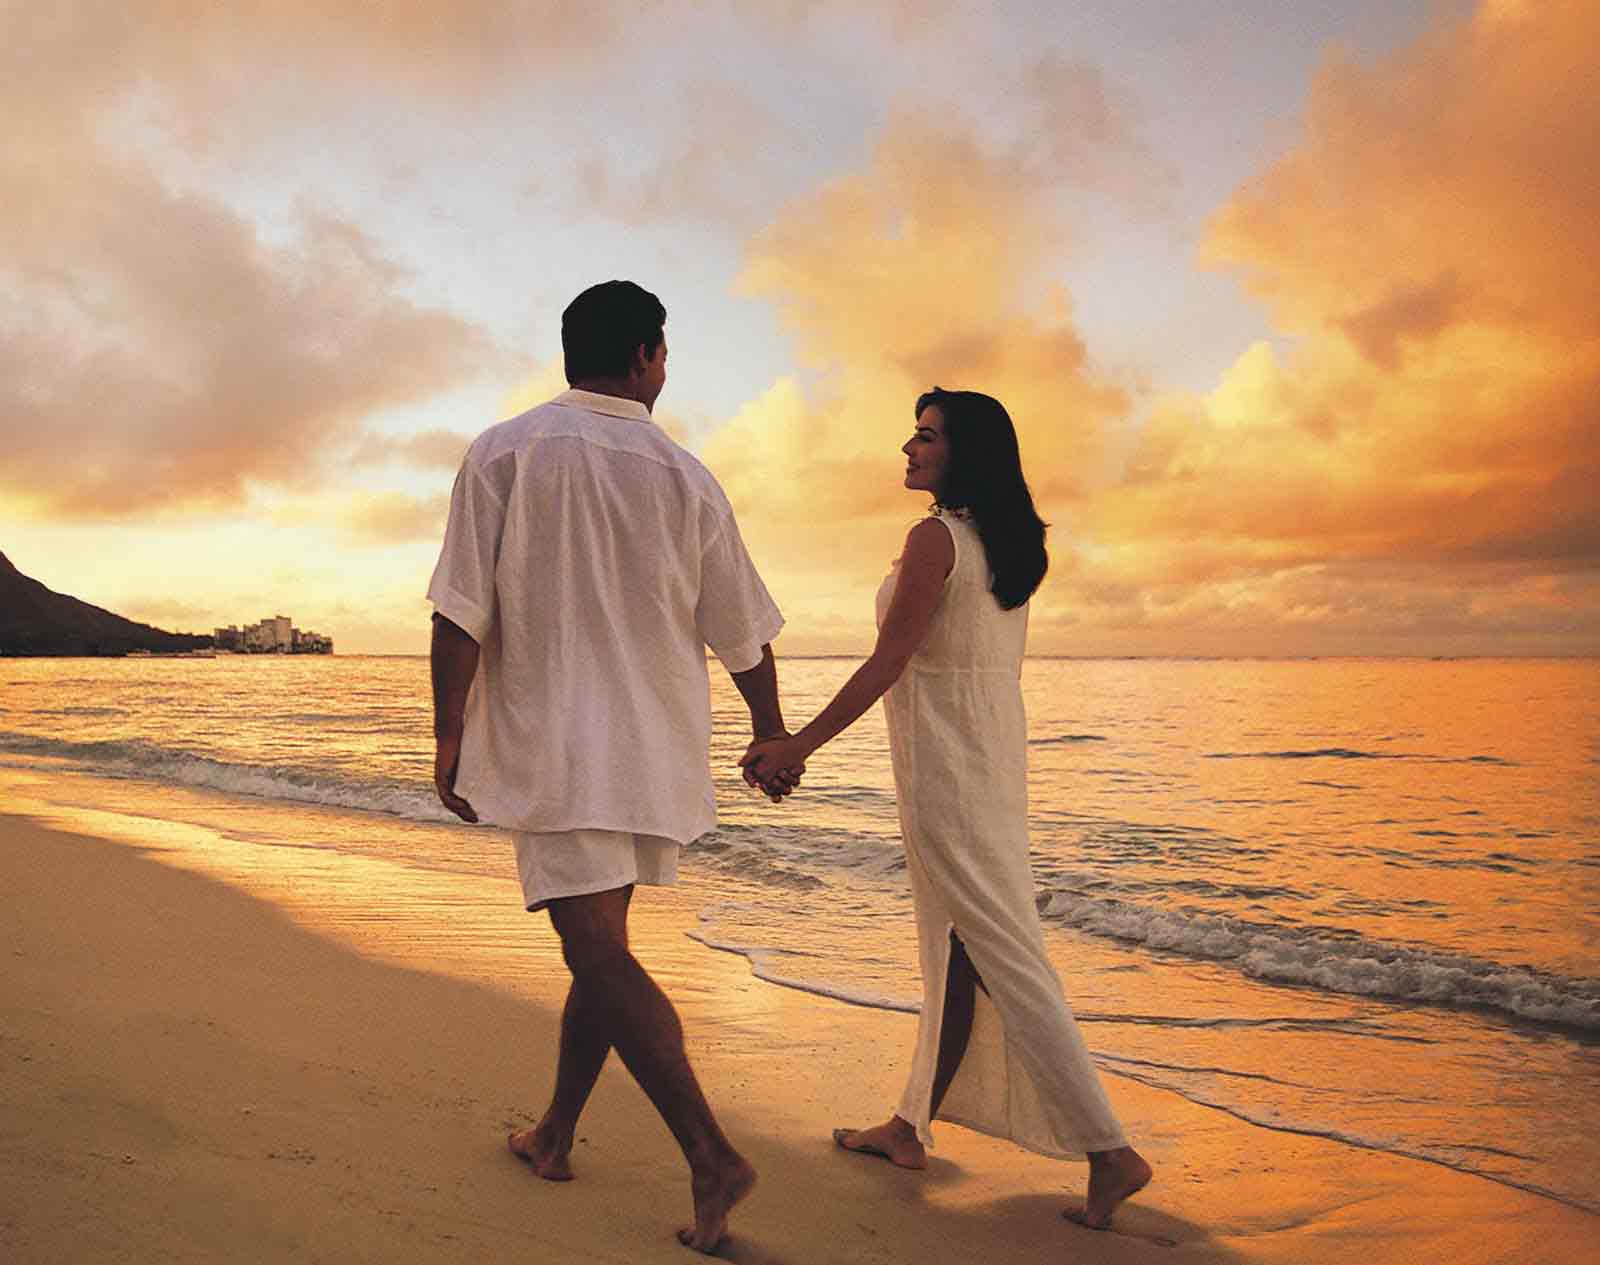 Couples At The Beach - HD Wallpaper 